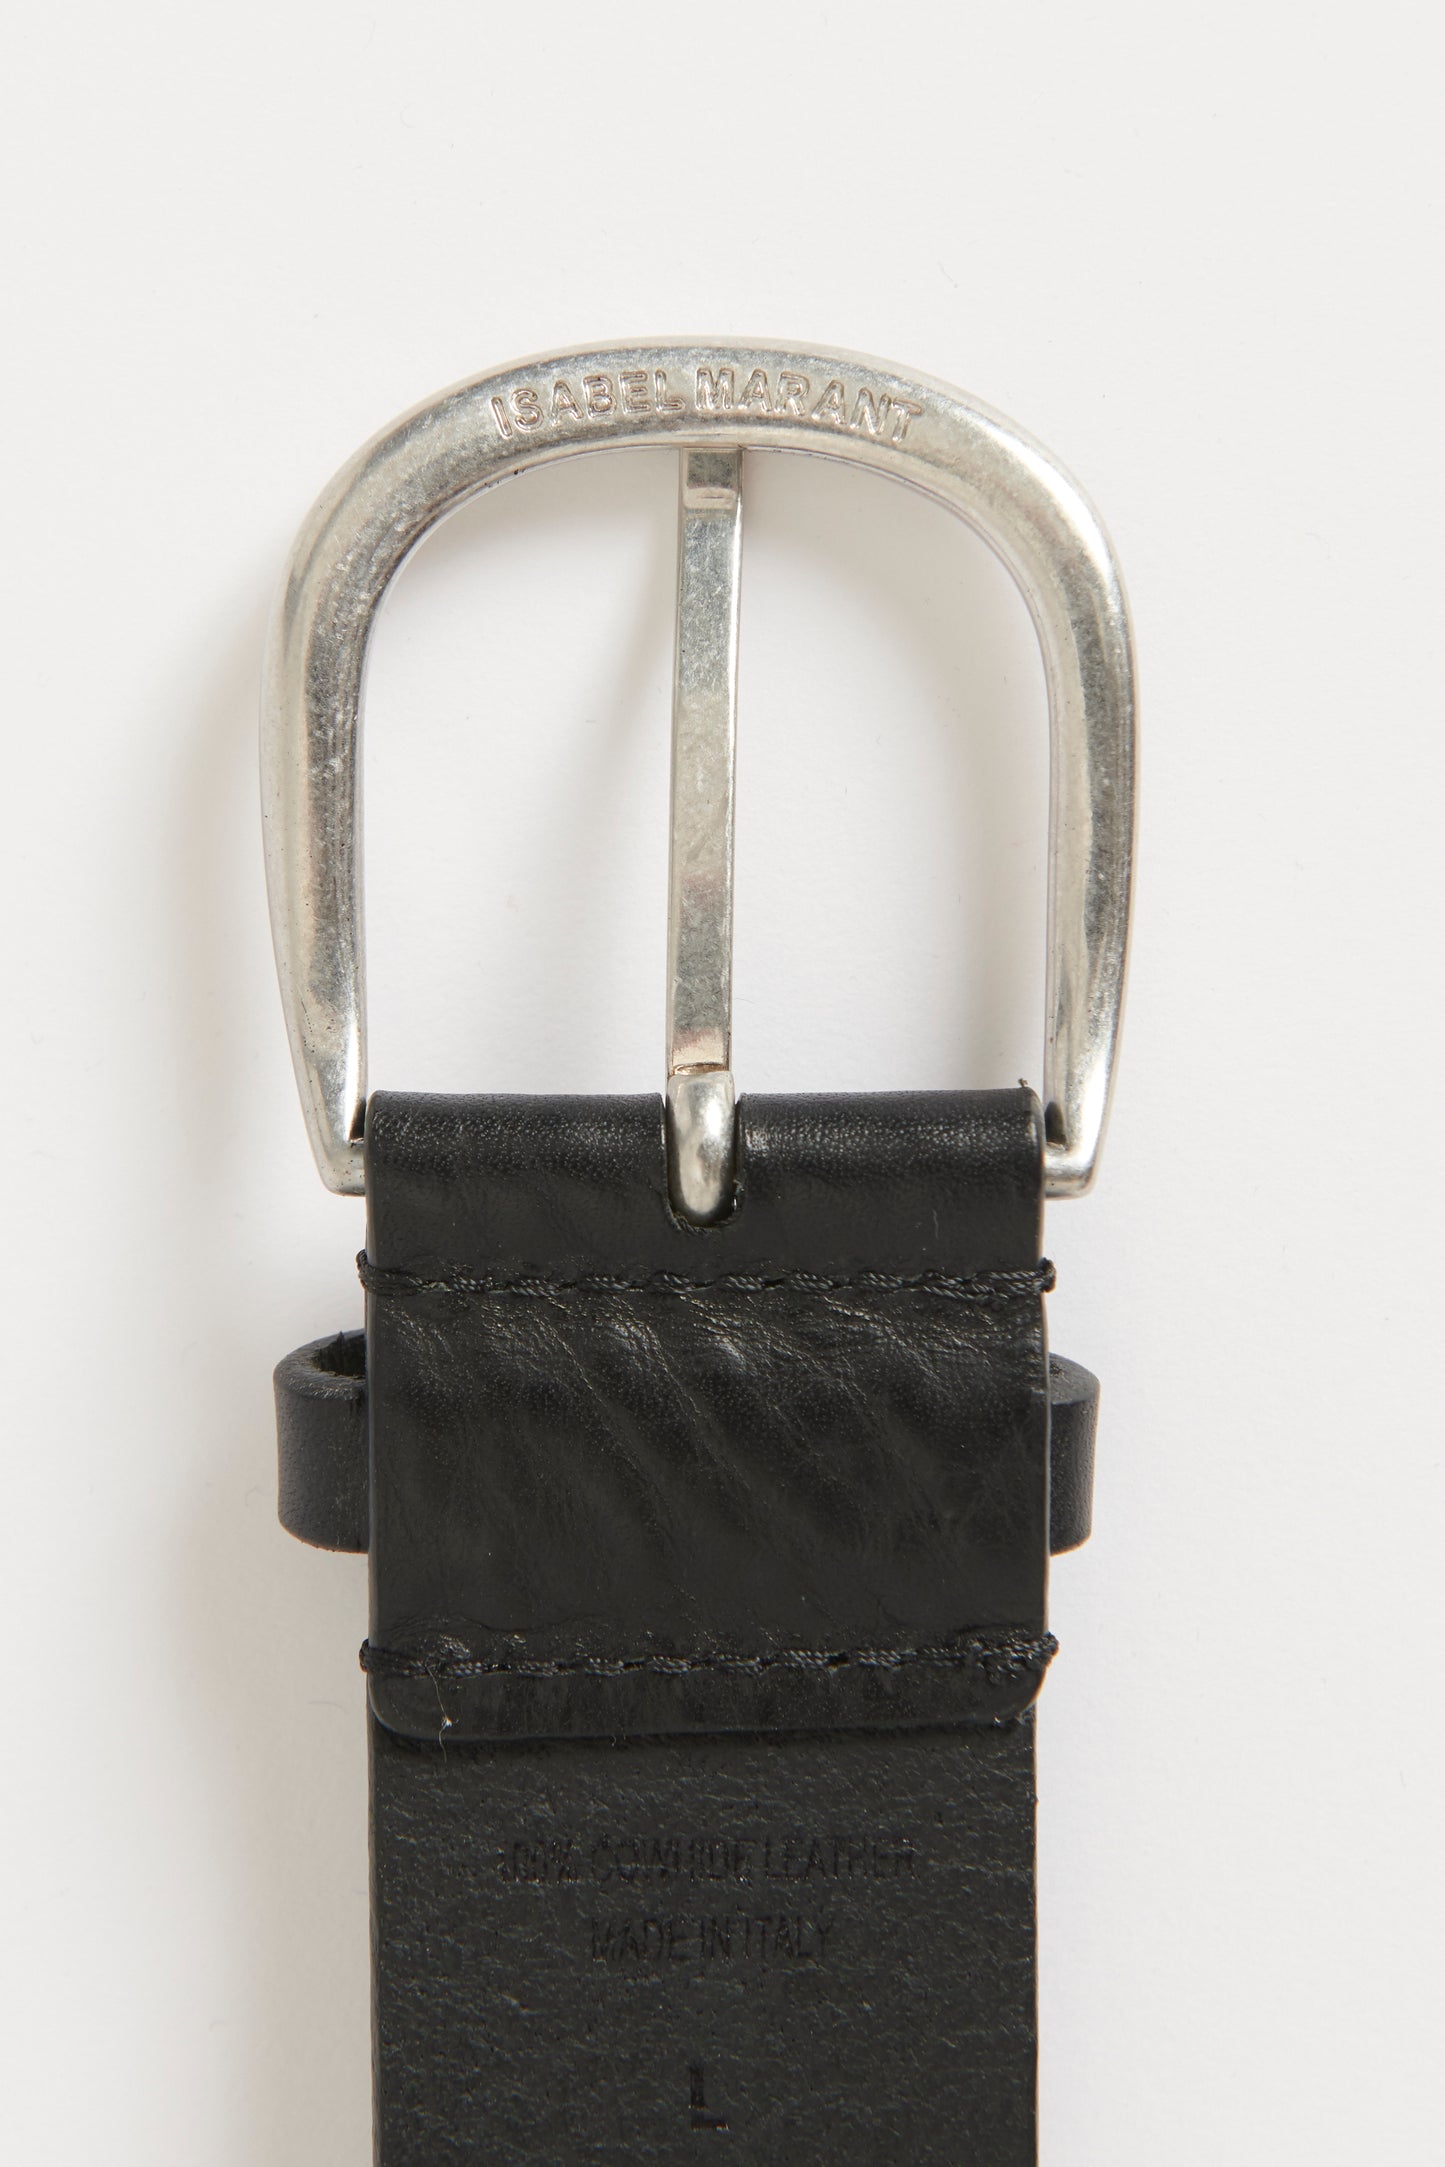 Black Leather Preowned Studded Belt